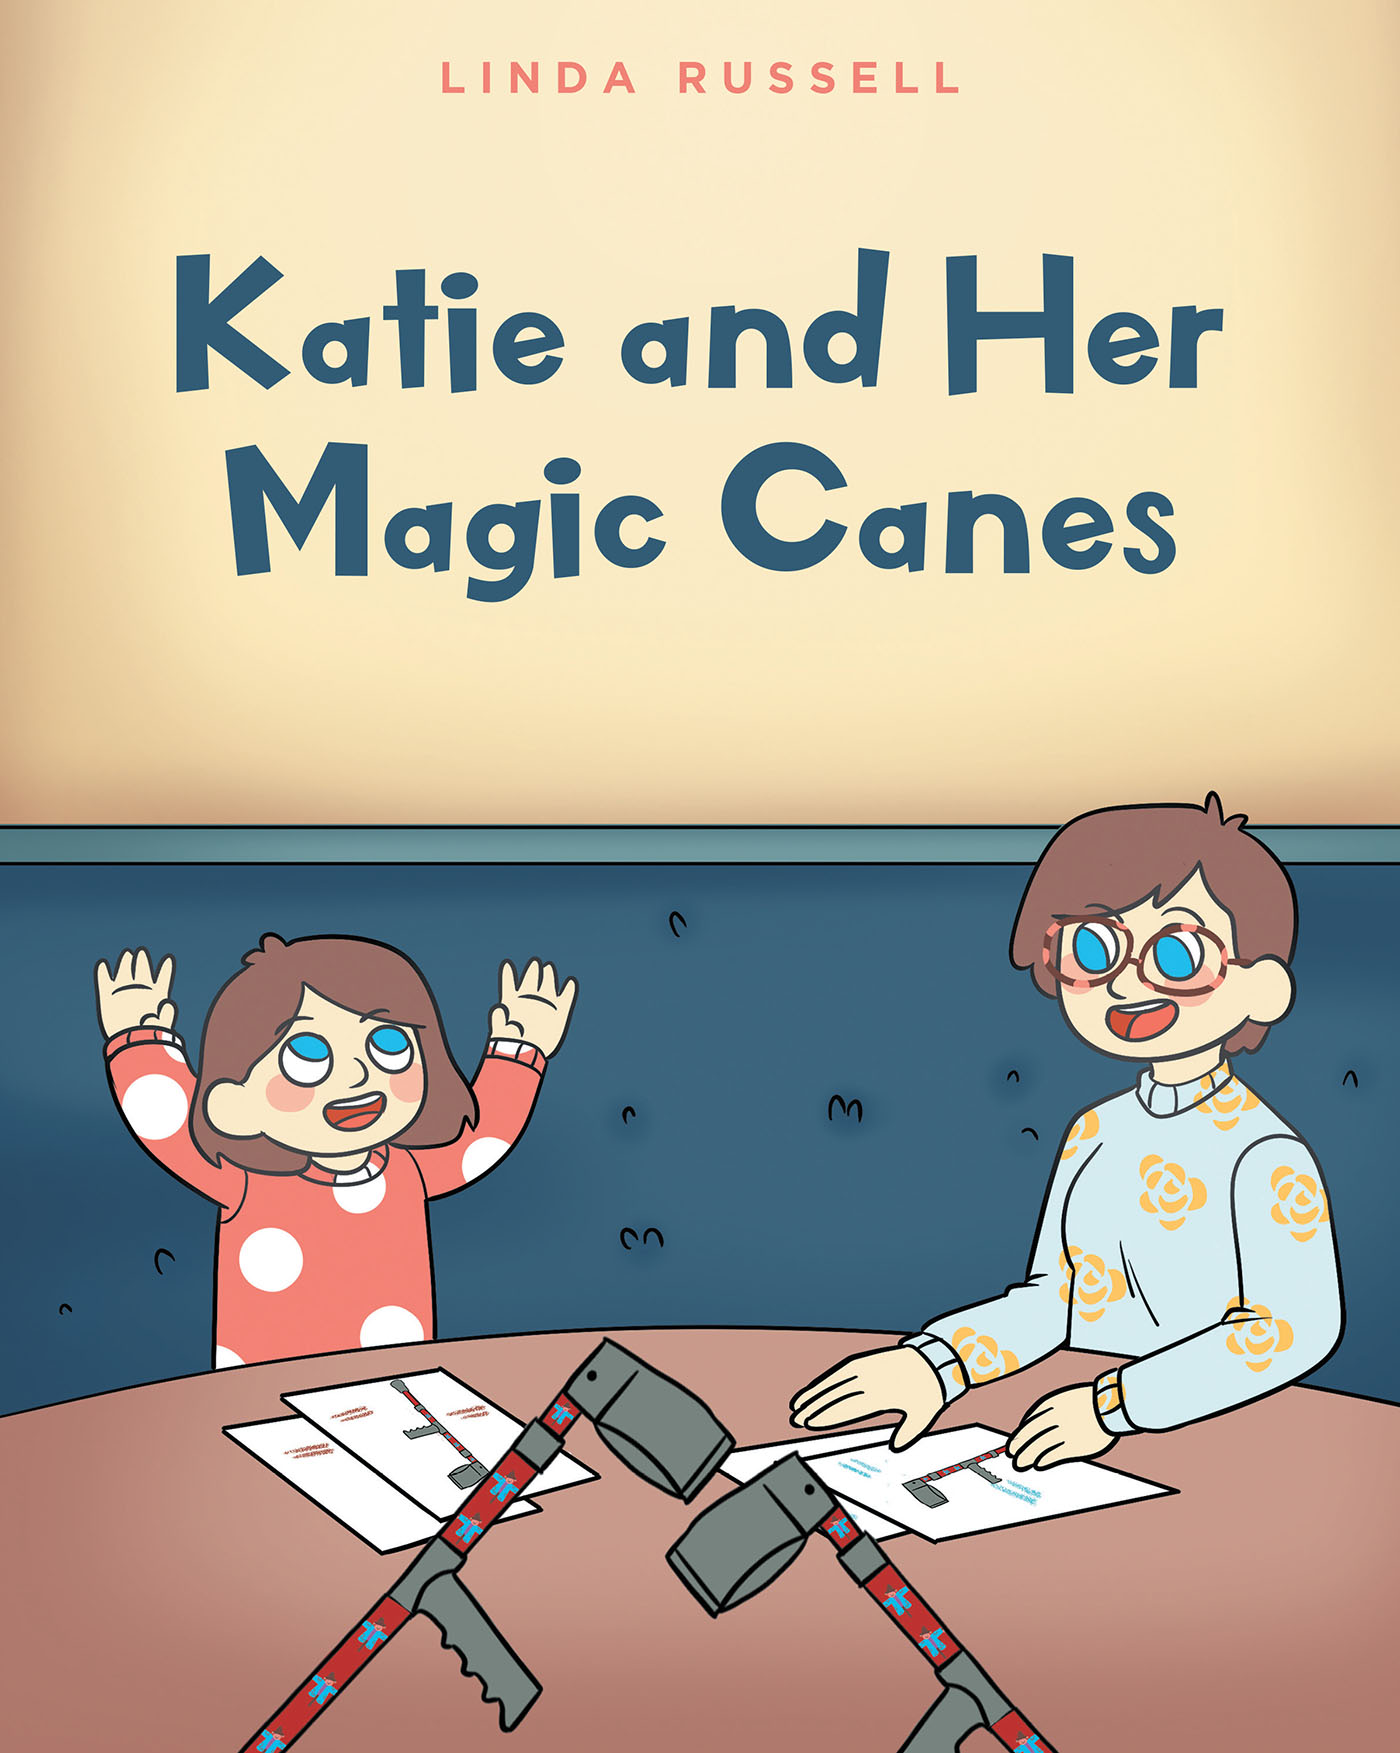 Linda Russell’s New Book, "Katie and Her Magic Canes," Centers Around a Young Girl with Cerebral Palsy Who Holds a Contest for Her Friends to Design Her New Canes